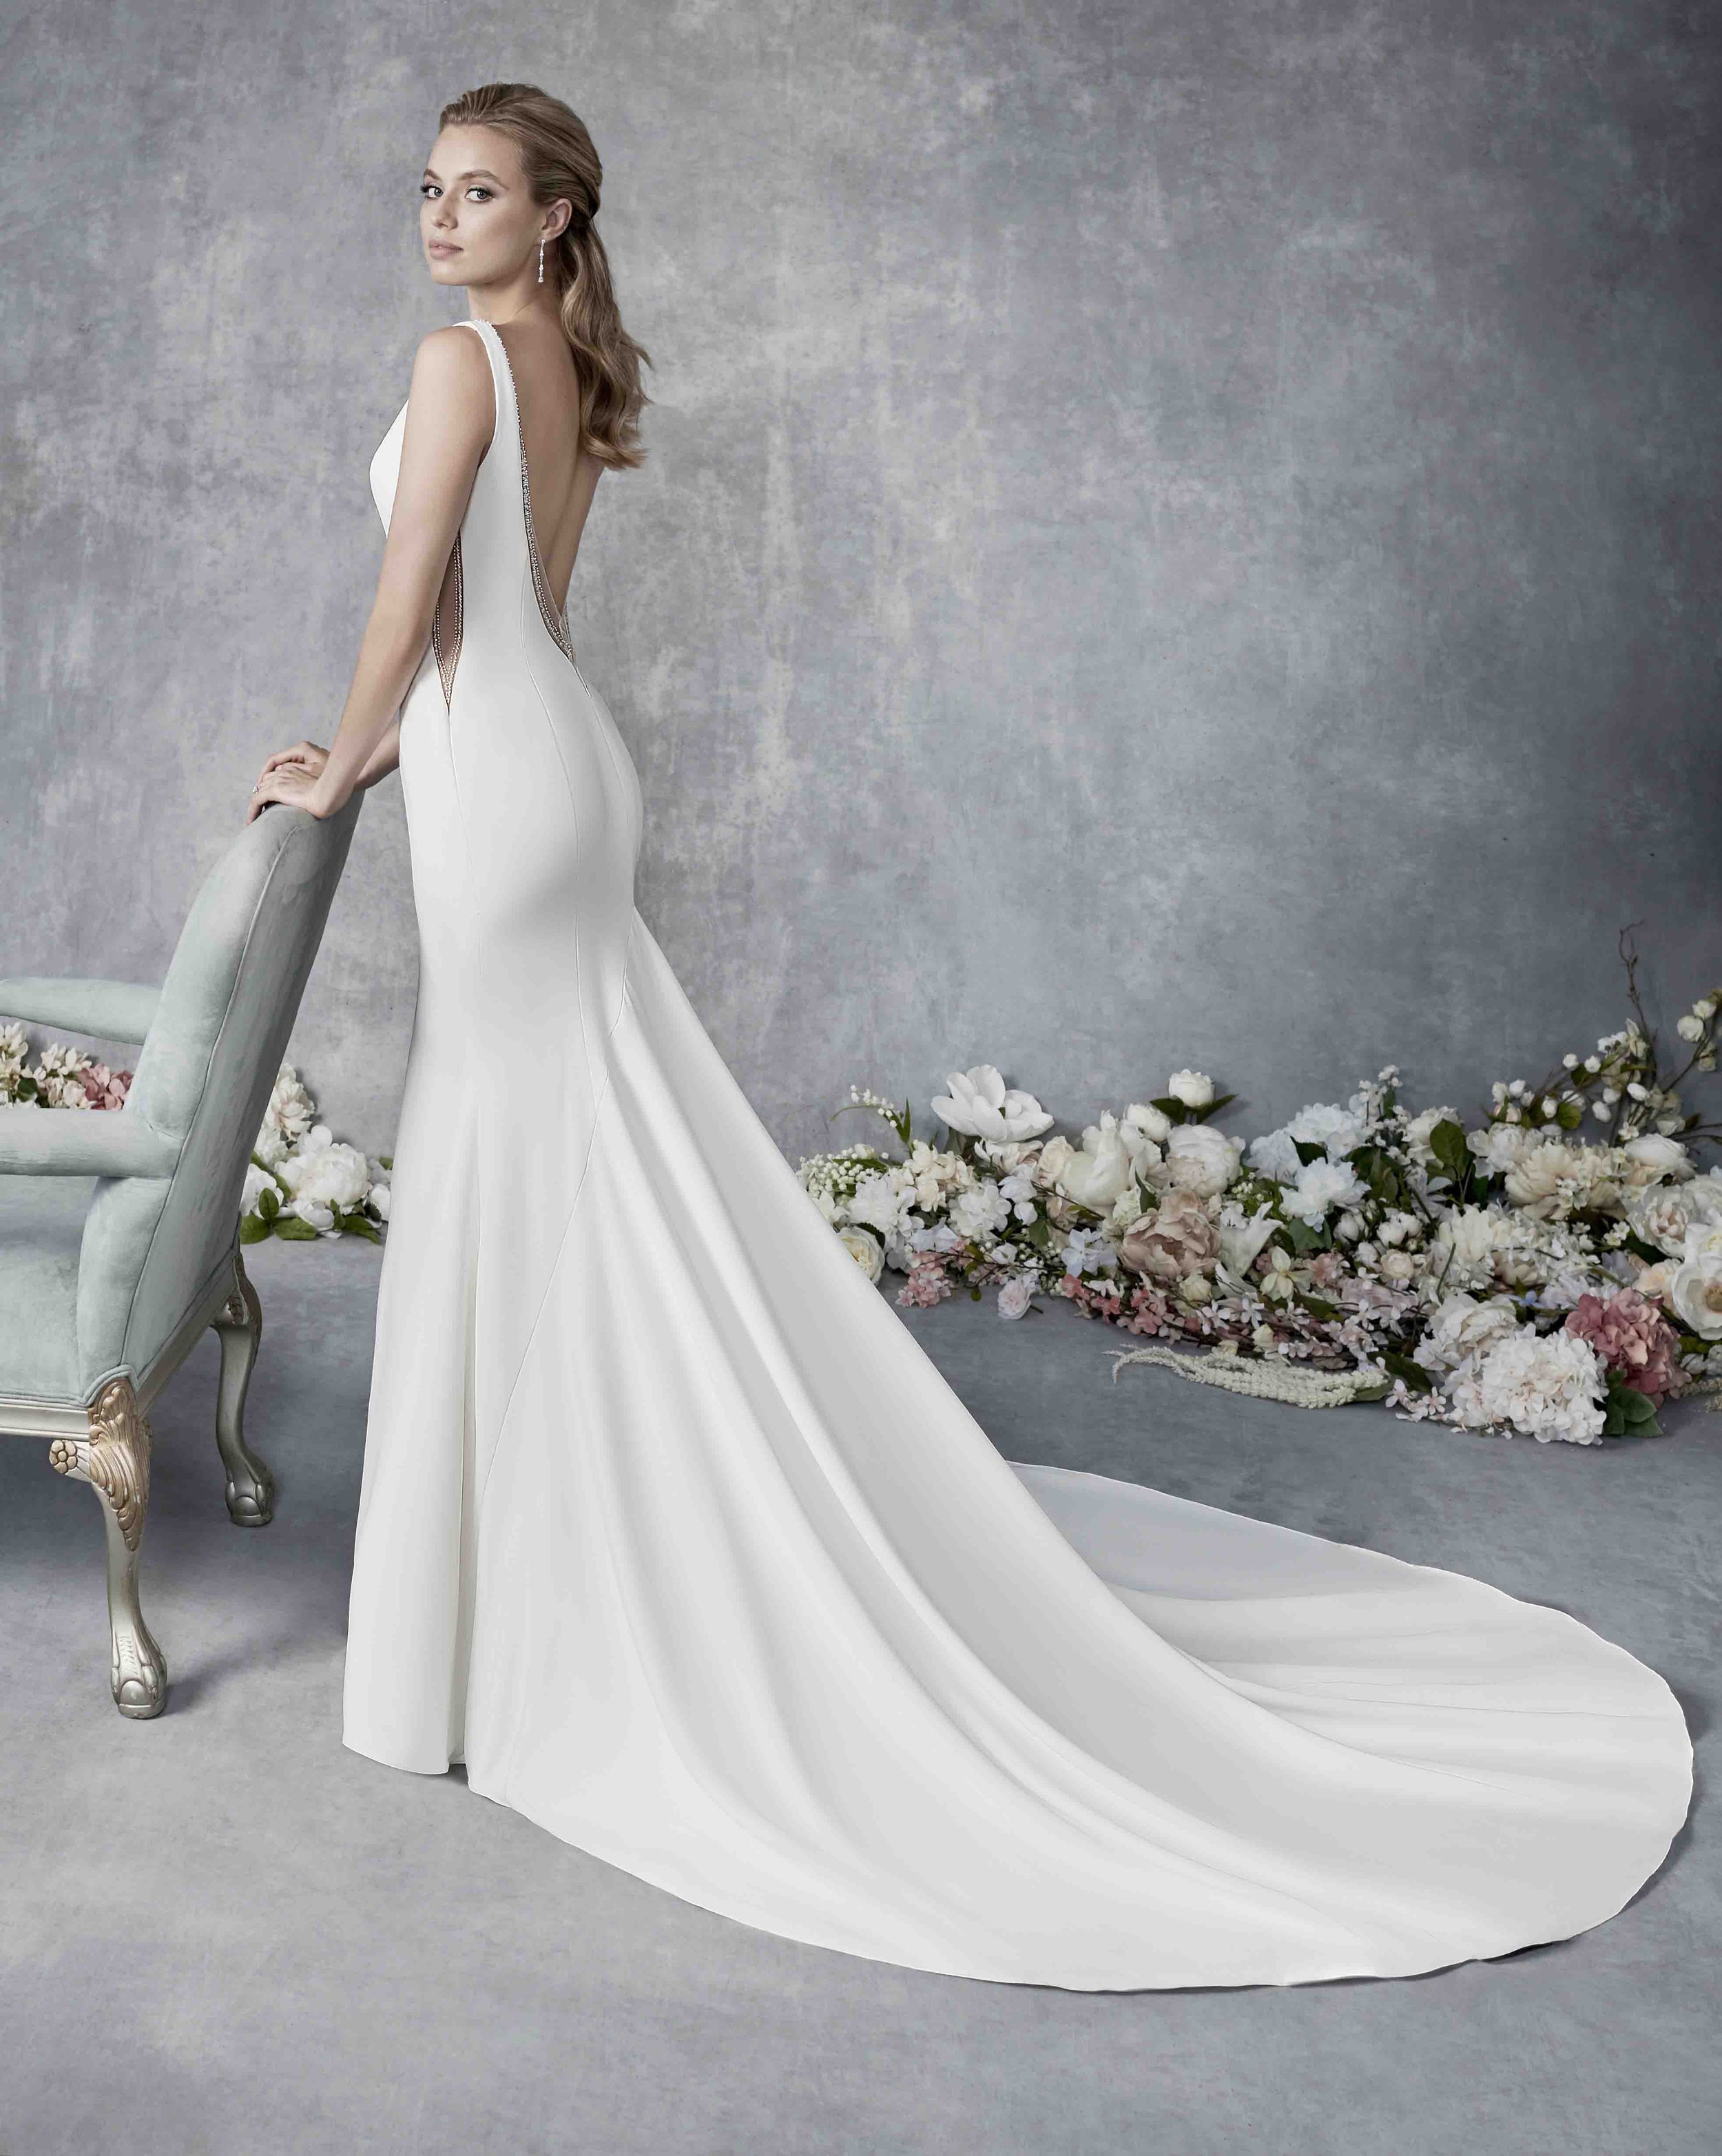 how much does a wedding dress cost? - Andrea Hawkes